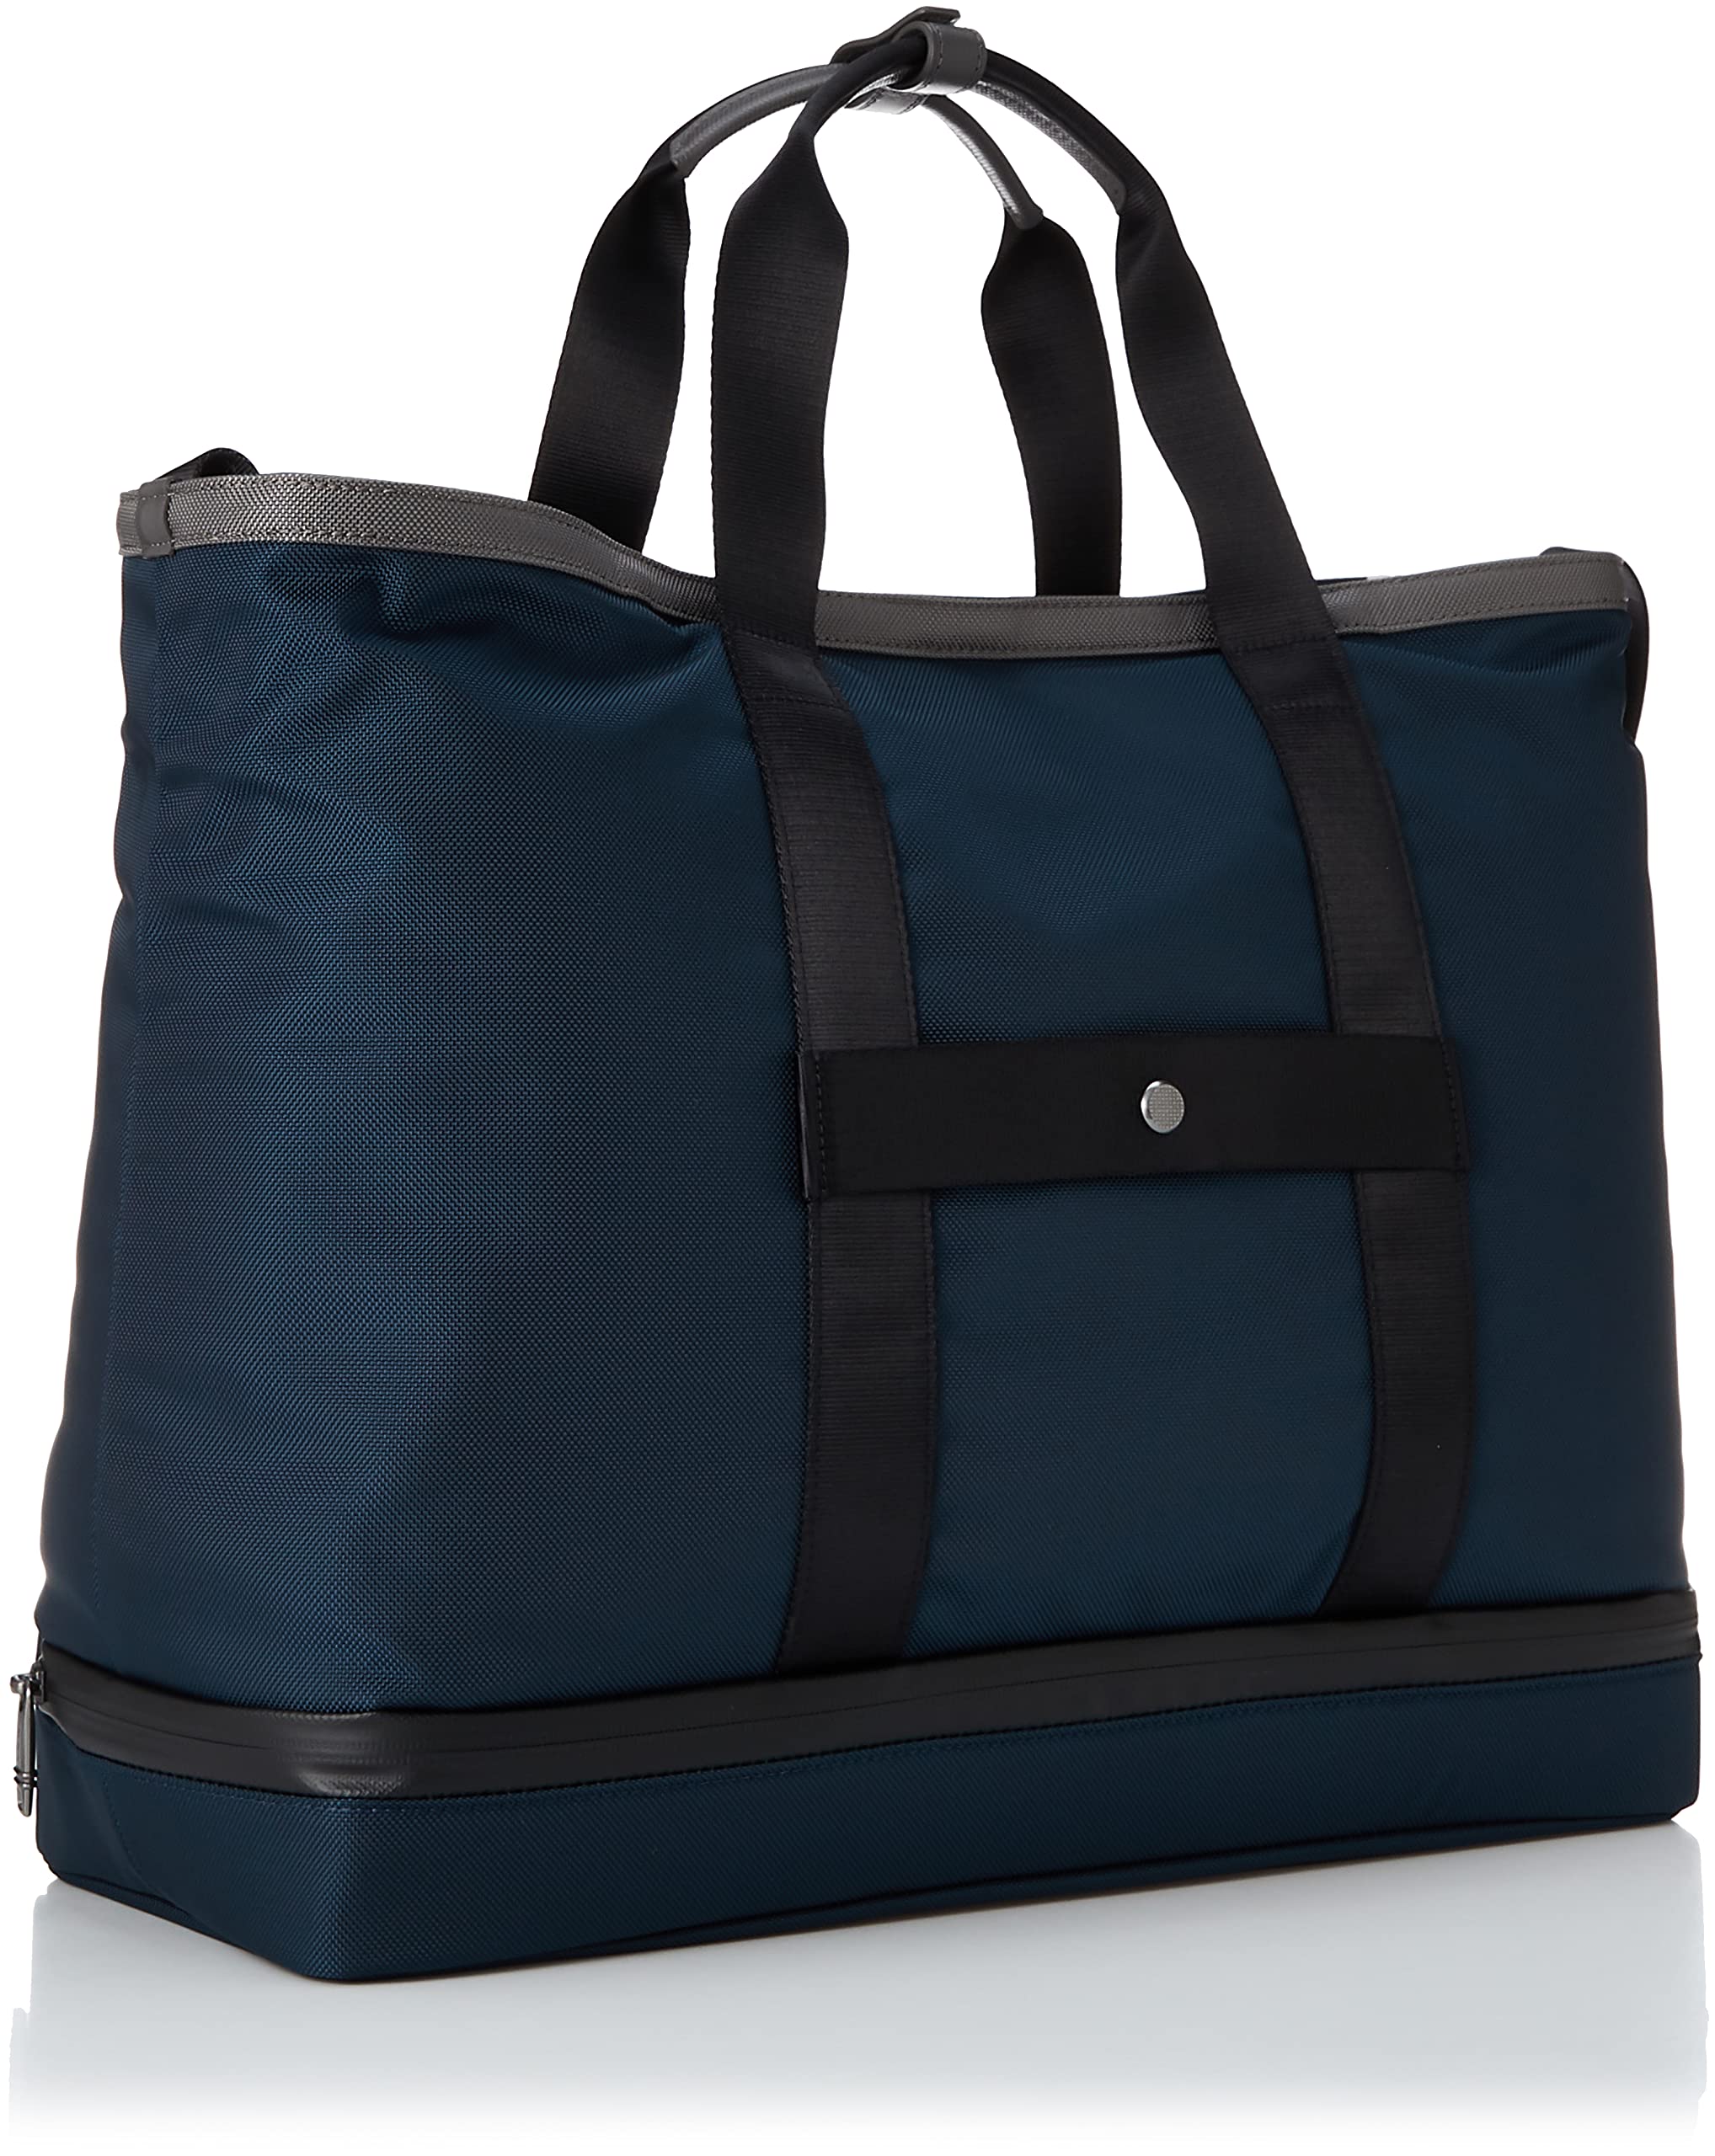 Tumi ALPHA Men's Carry All Tote Bag, Official Authentic Product